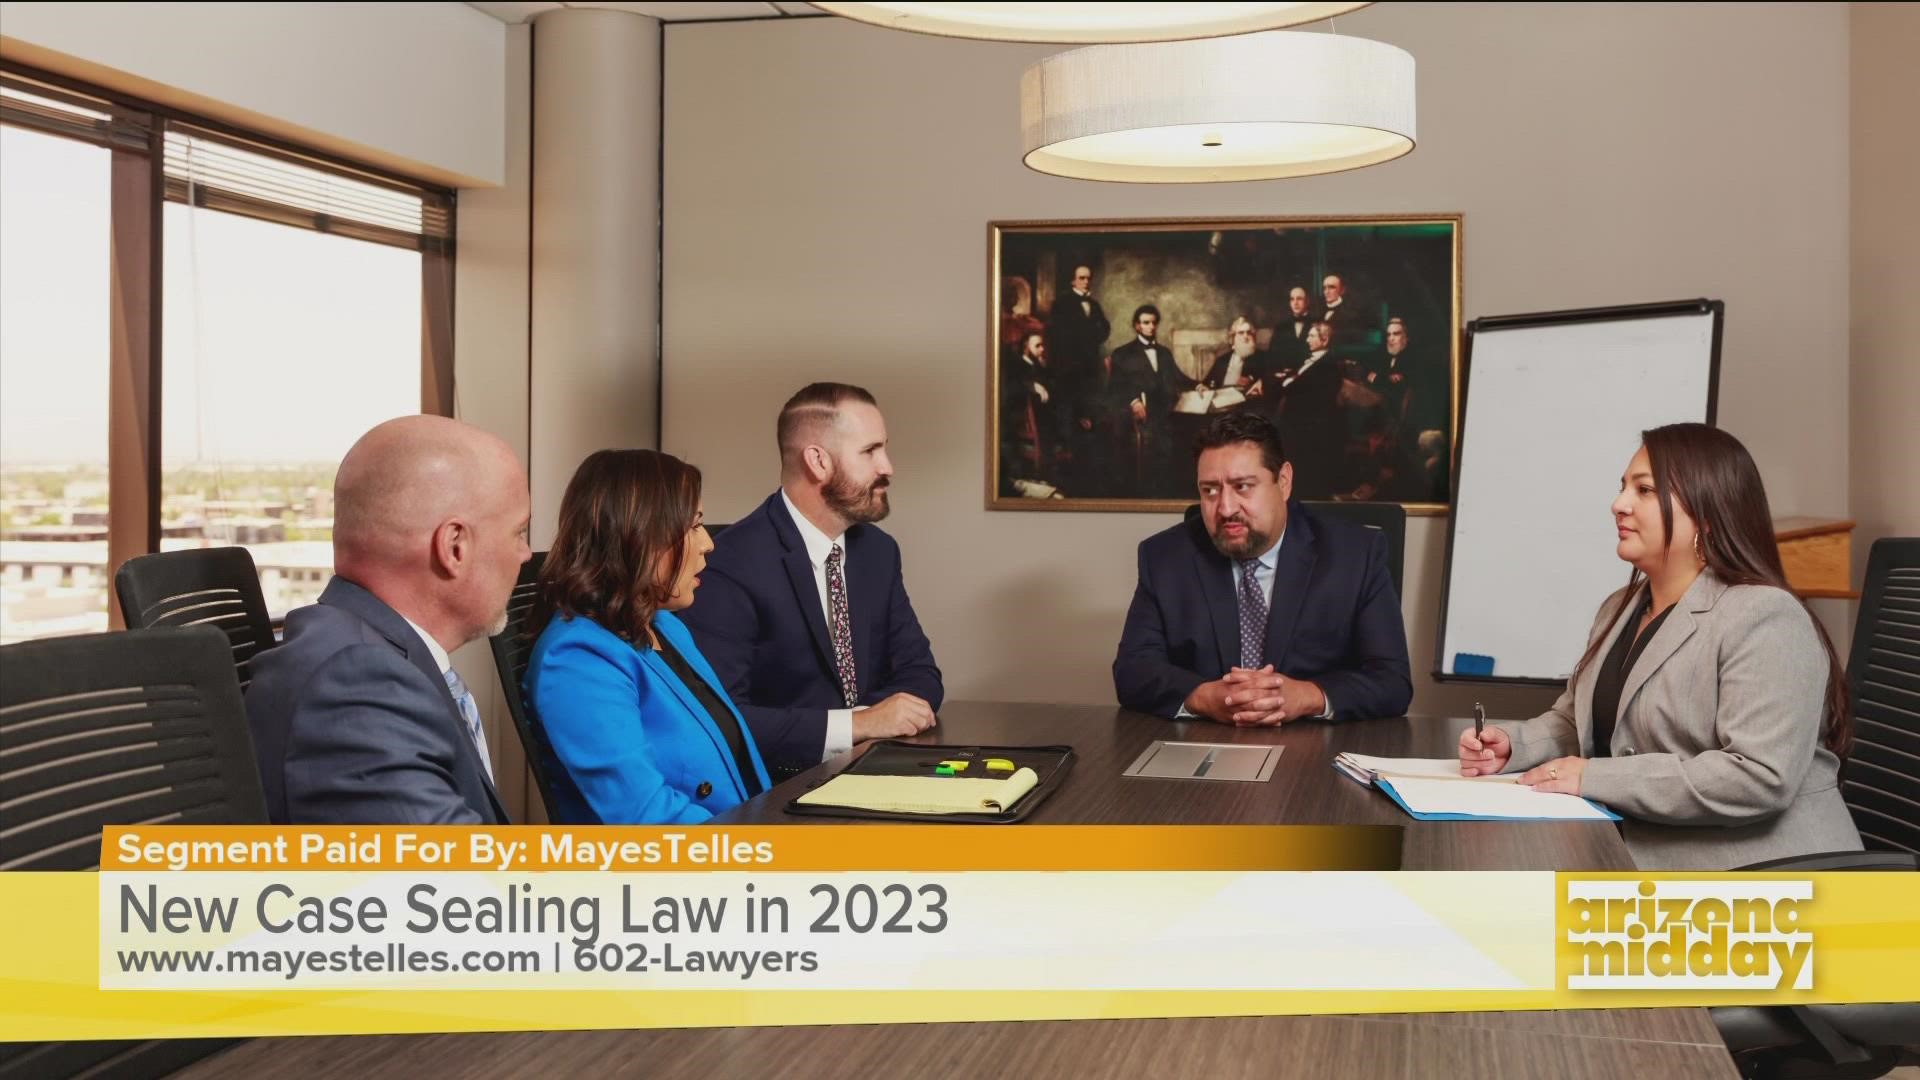 Shahin Damoui with MayesTelles breaks down the new case sealing law going into effect in 2023 and shares why it's important for Arizonans.